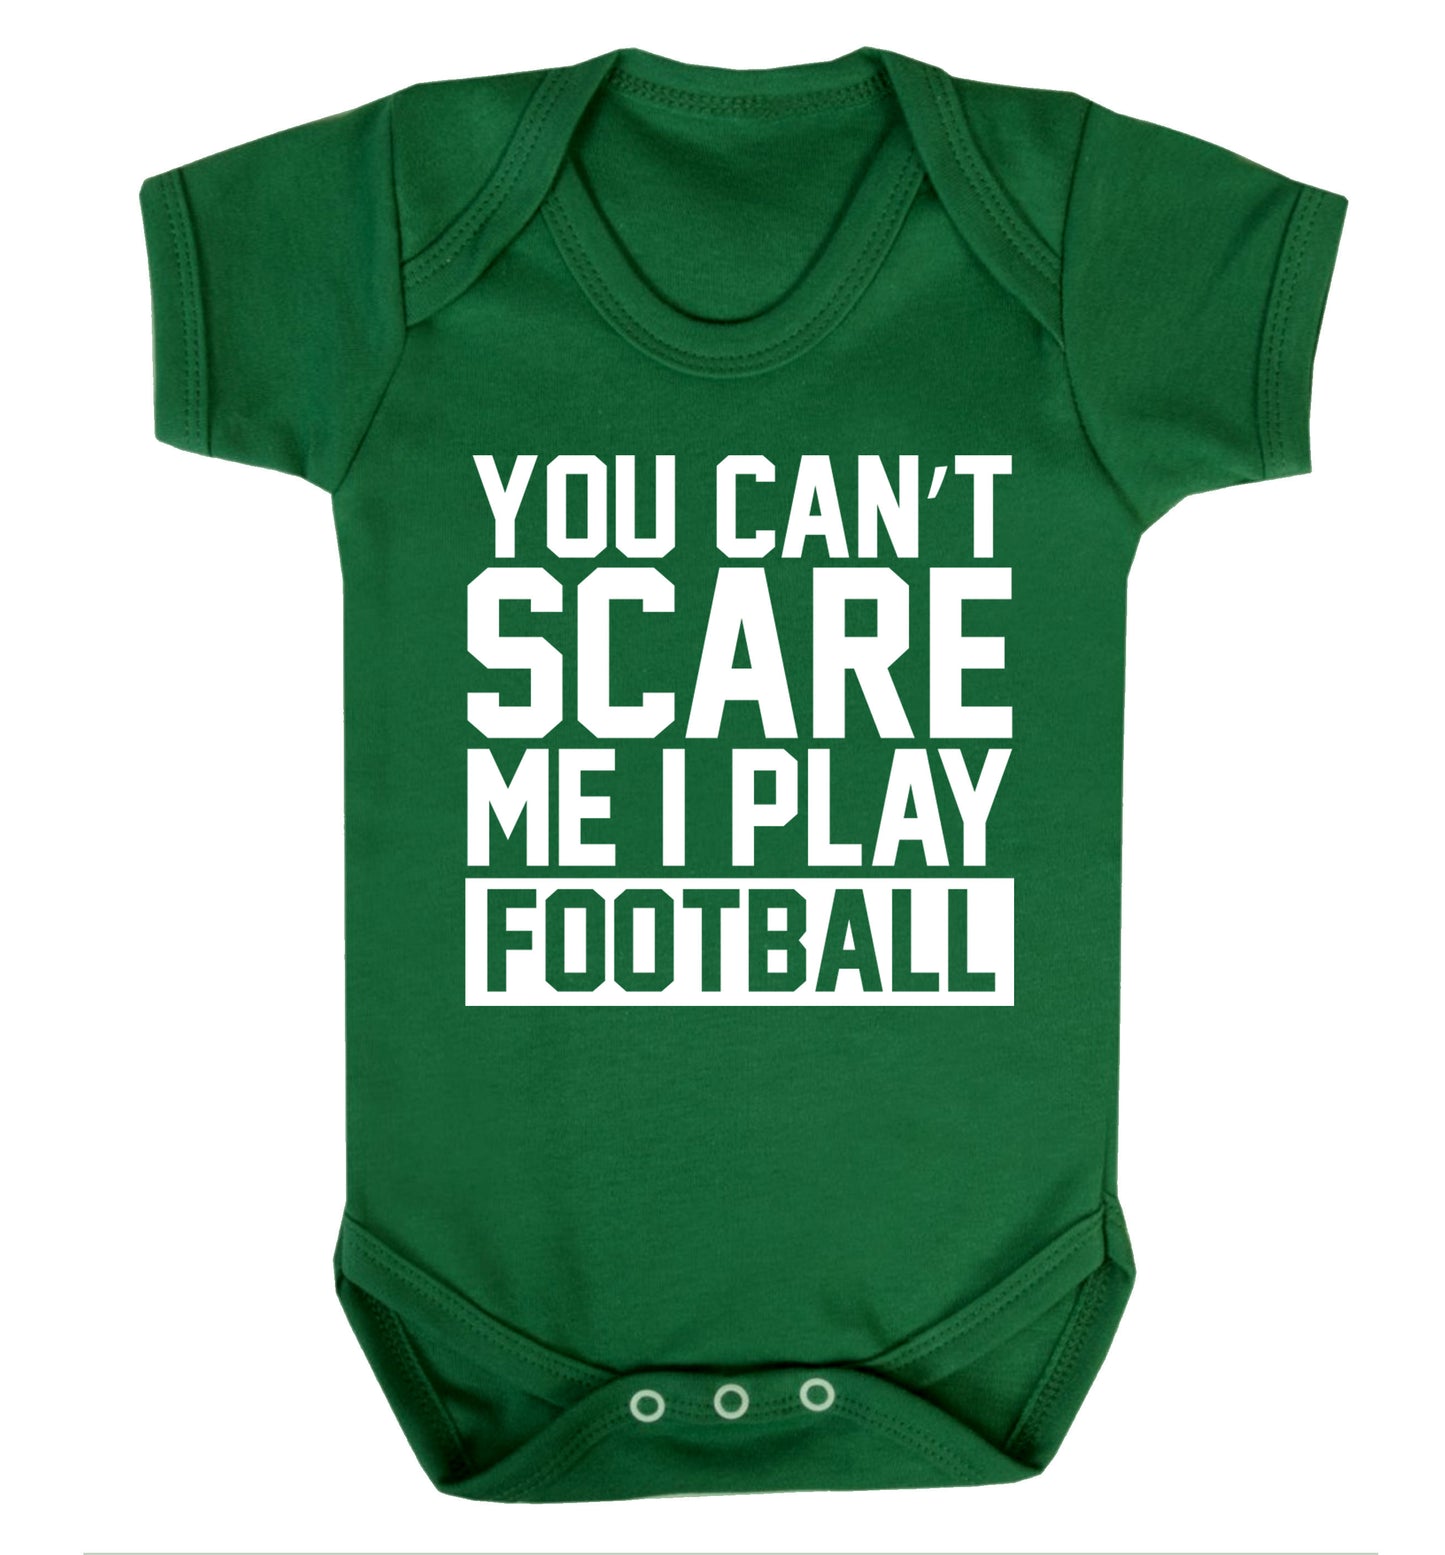 You can't scare me I play football Baby Vest green 18-24 months